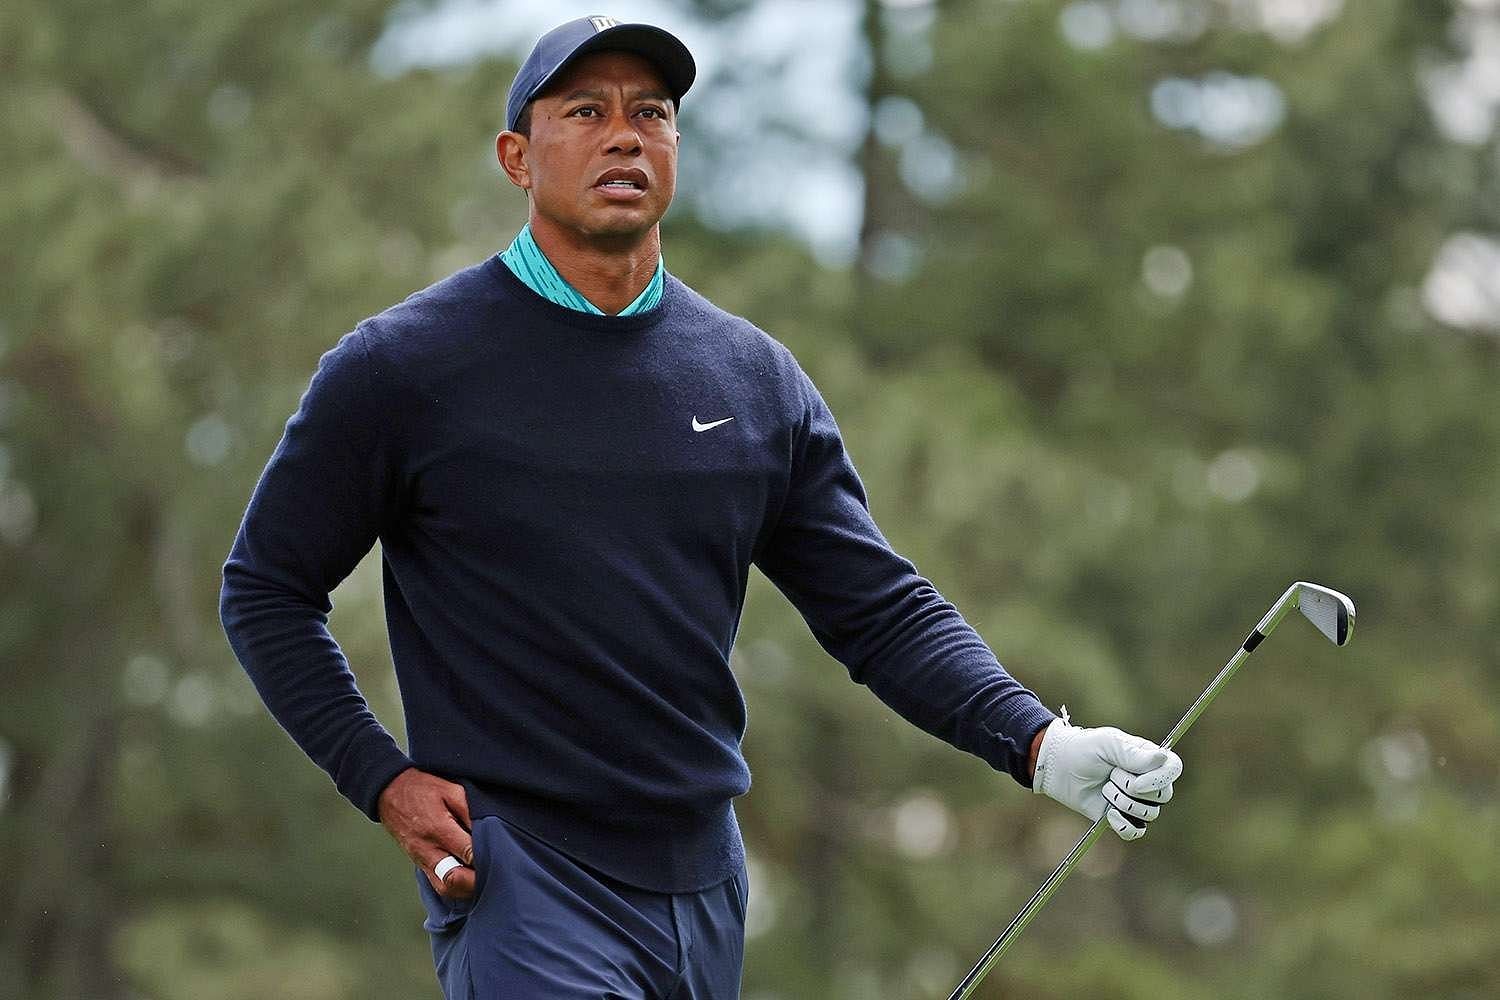 Tiger Woods finished at tied 45th place in the Genesis Invitational 2023